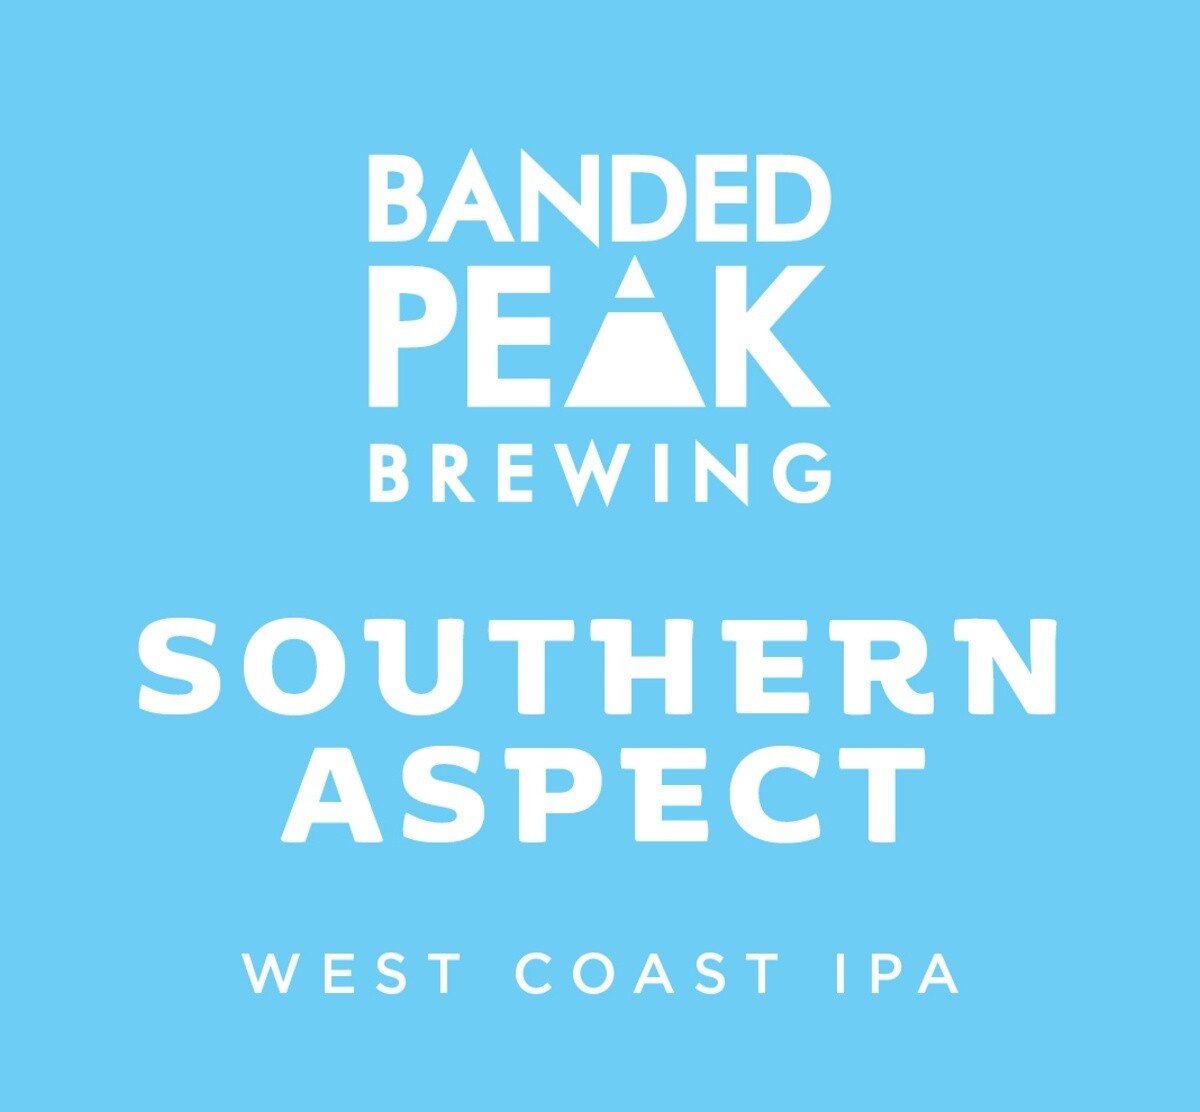 BANDED PEAK SOUTHERN ASPECT 4PK CAN